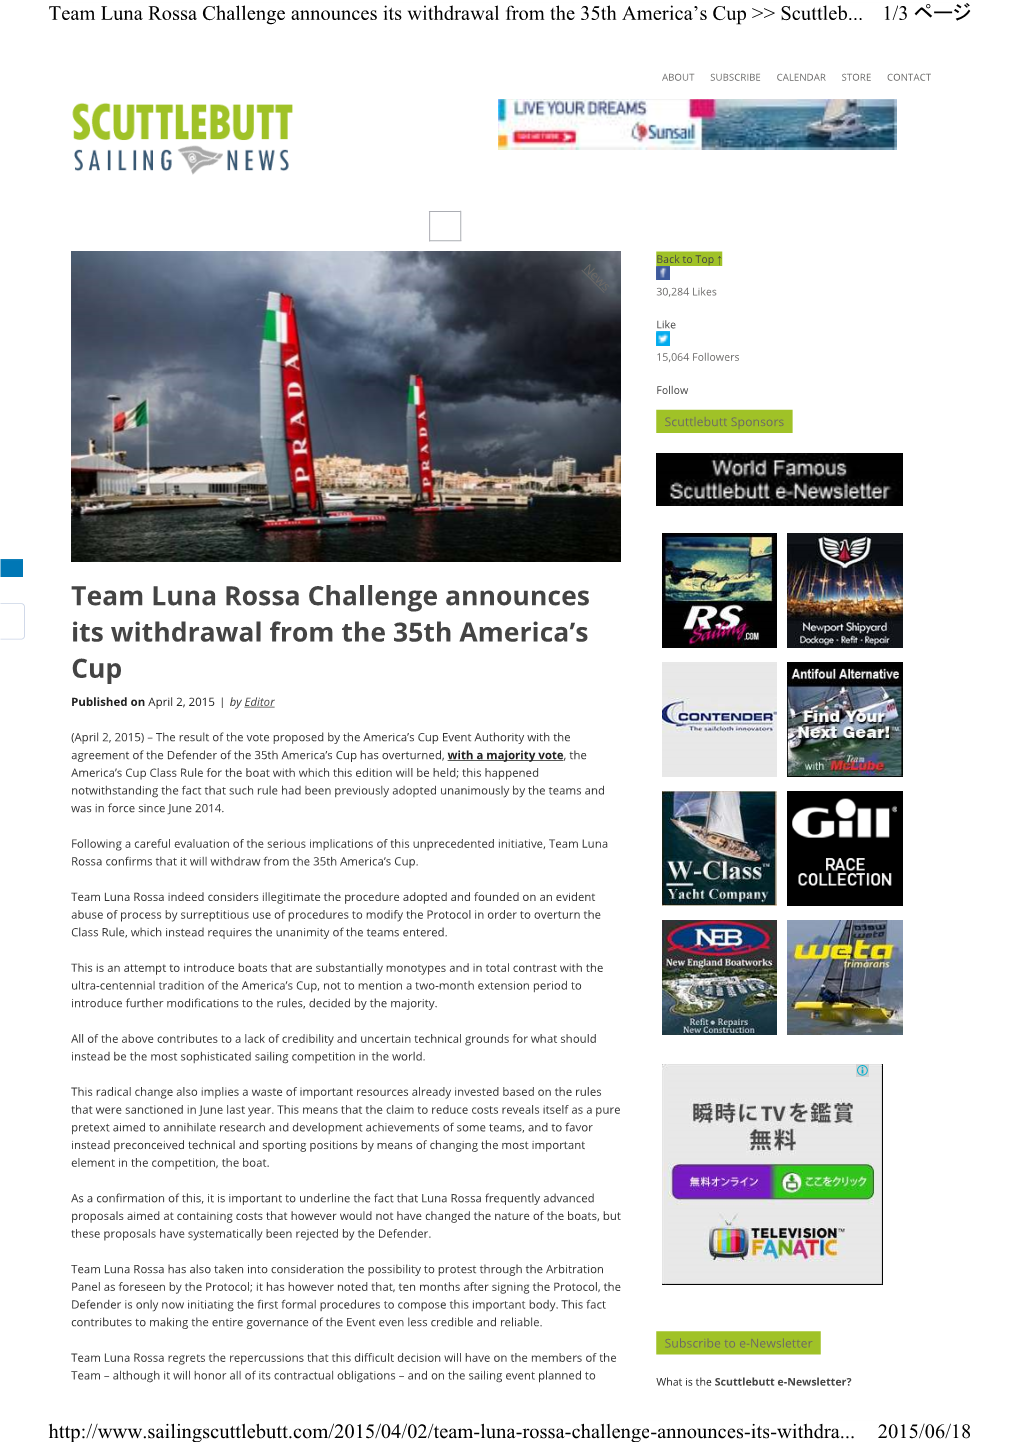 Team Luna Rossa Challenge Announces Its Withdrawal from the 35Th America ’S Cup >> Scuttleb